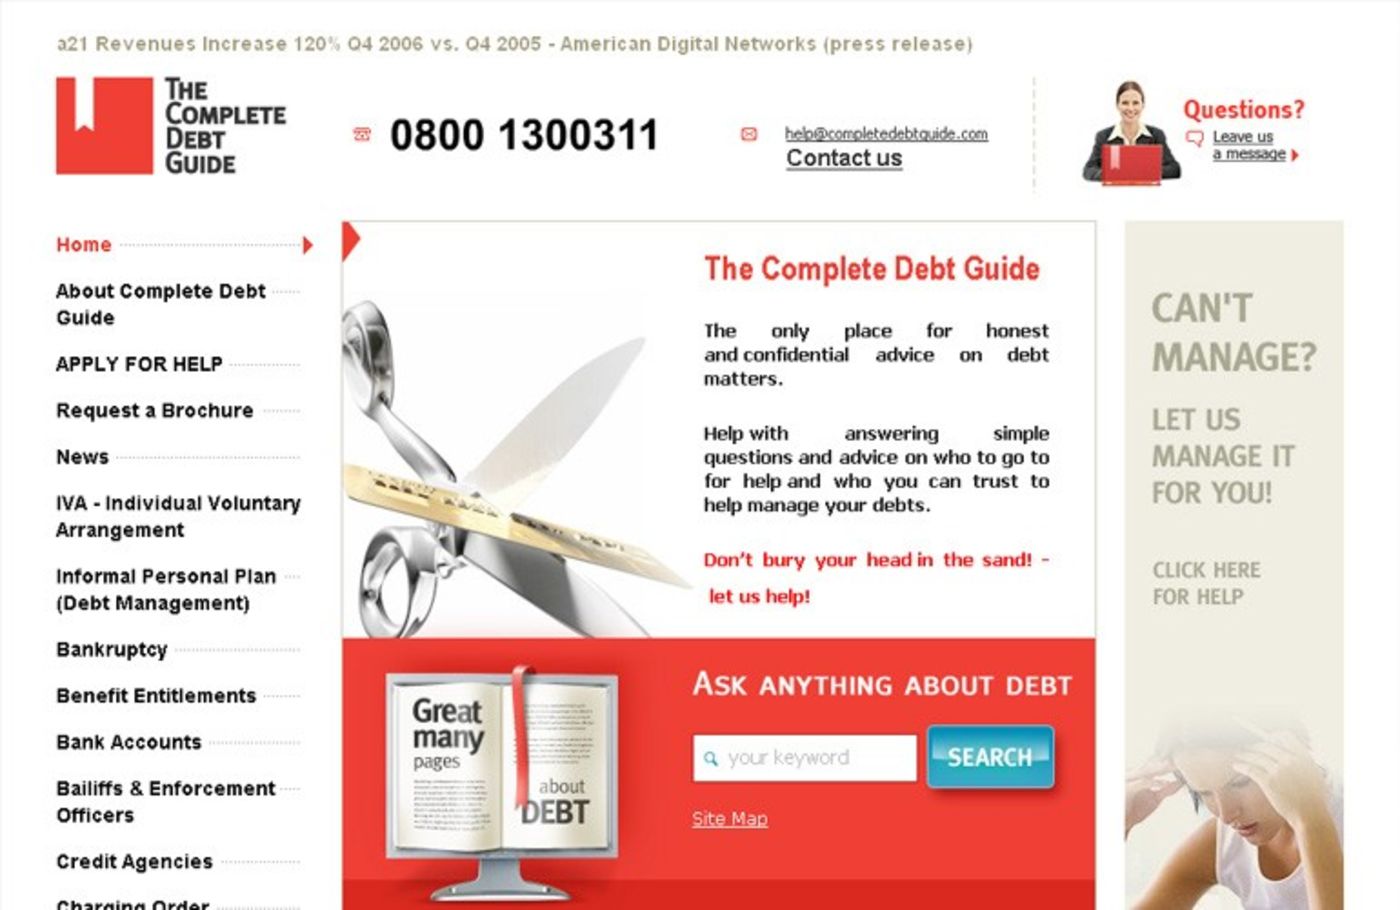 The Complete Debt Guide Homepage header